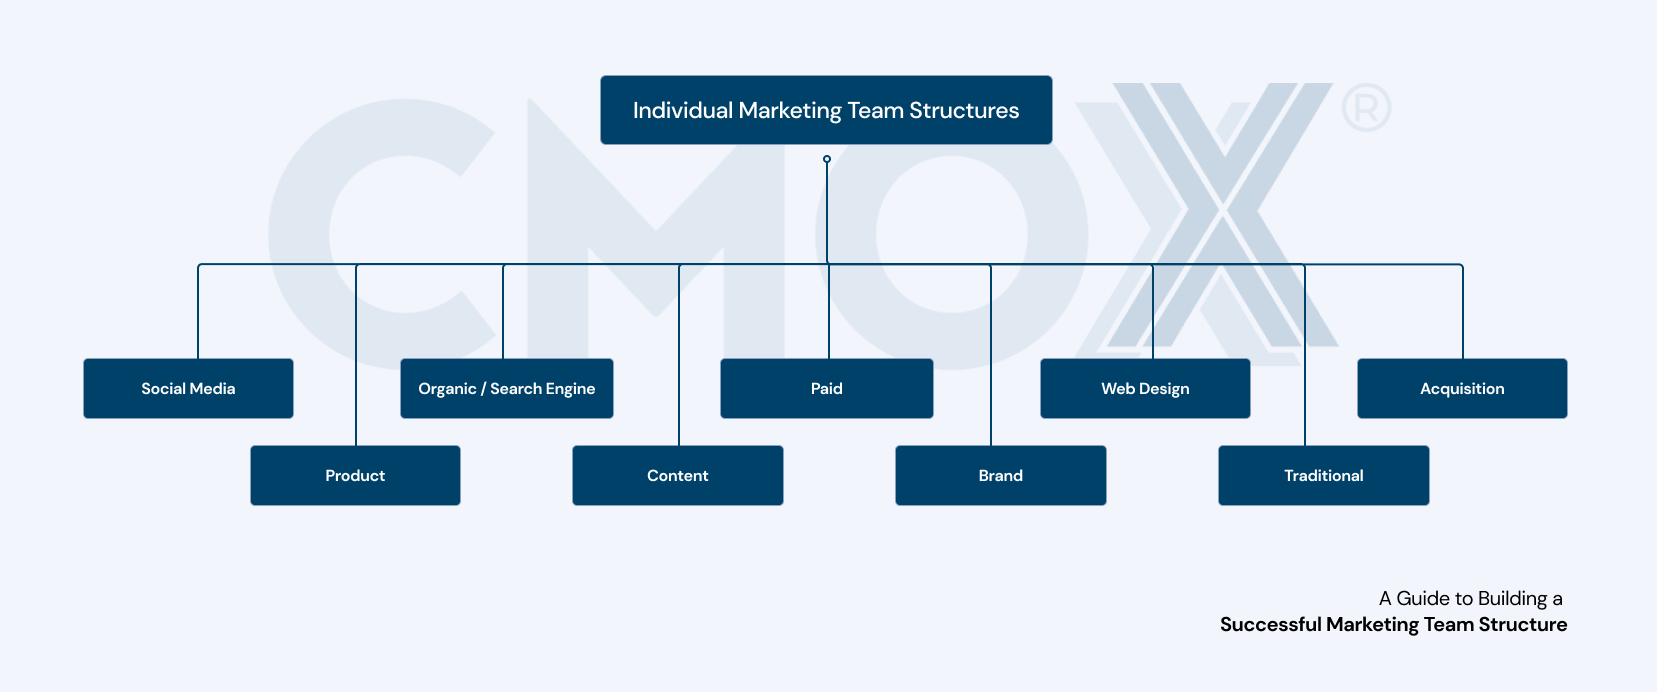 Individual Marketing Team Structures